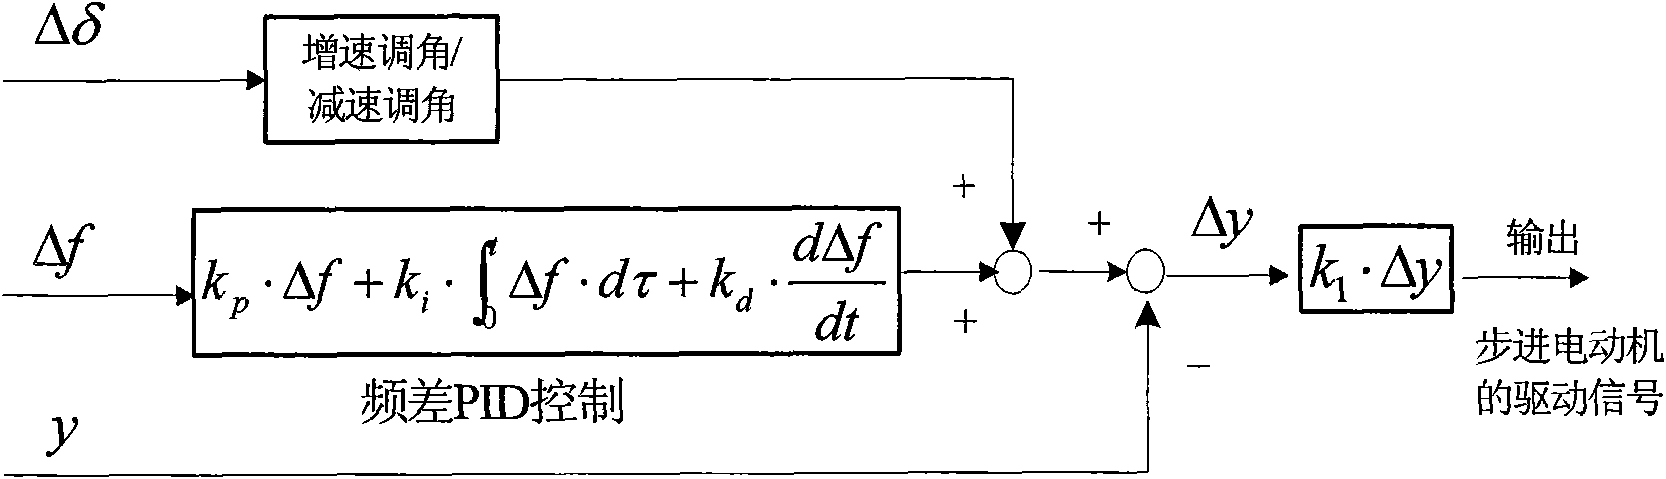 Quick ideal condition quasi-synchronization paralleling method of hydro-generator